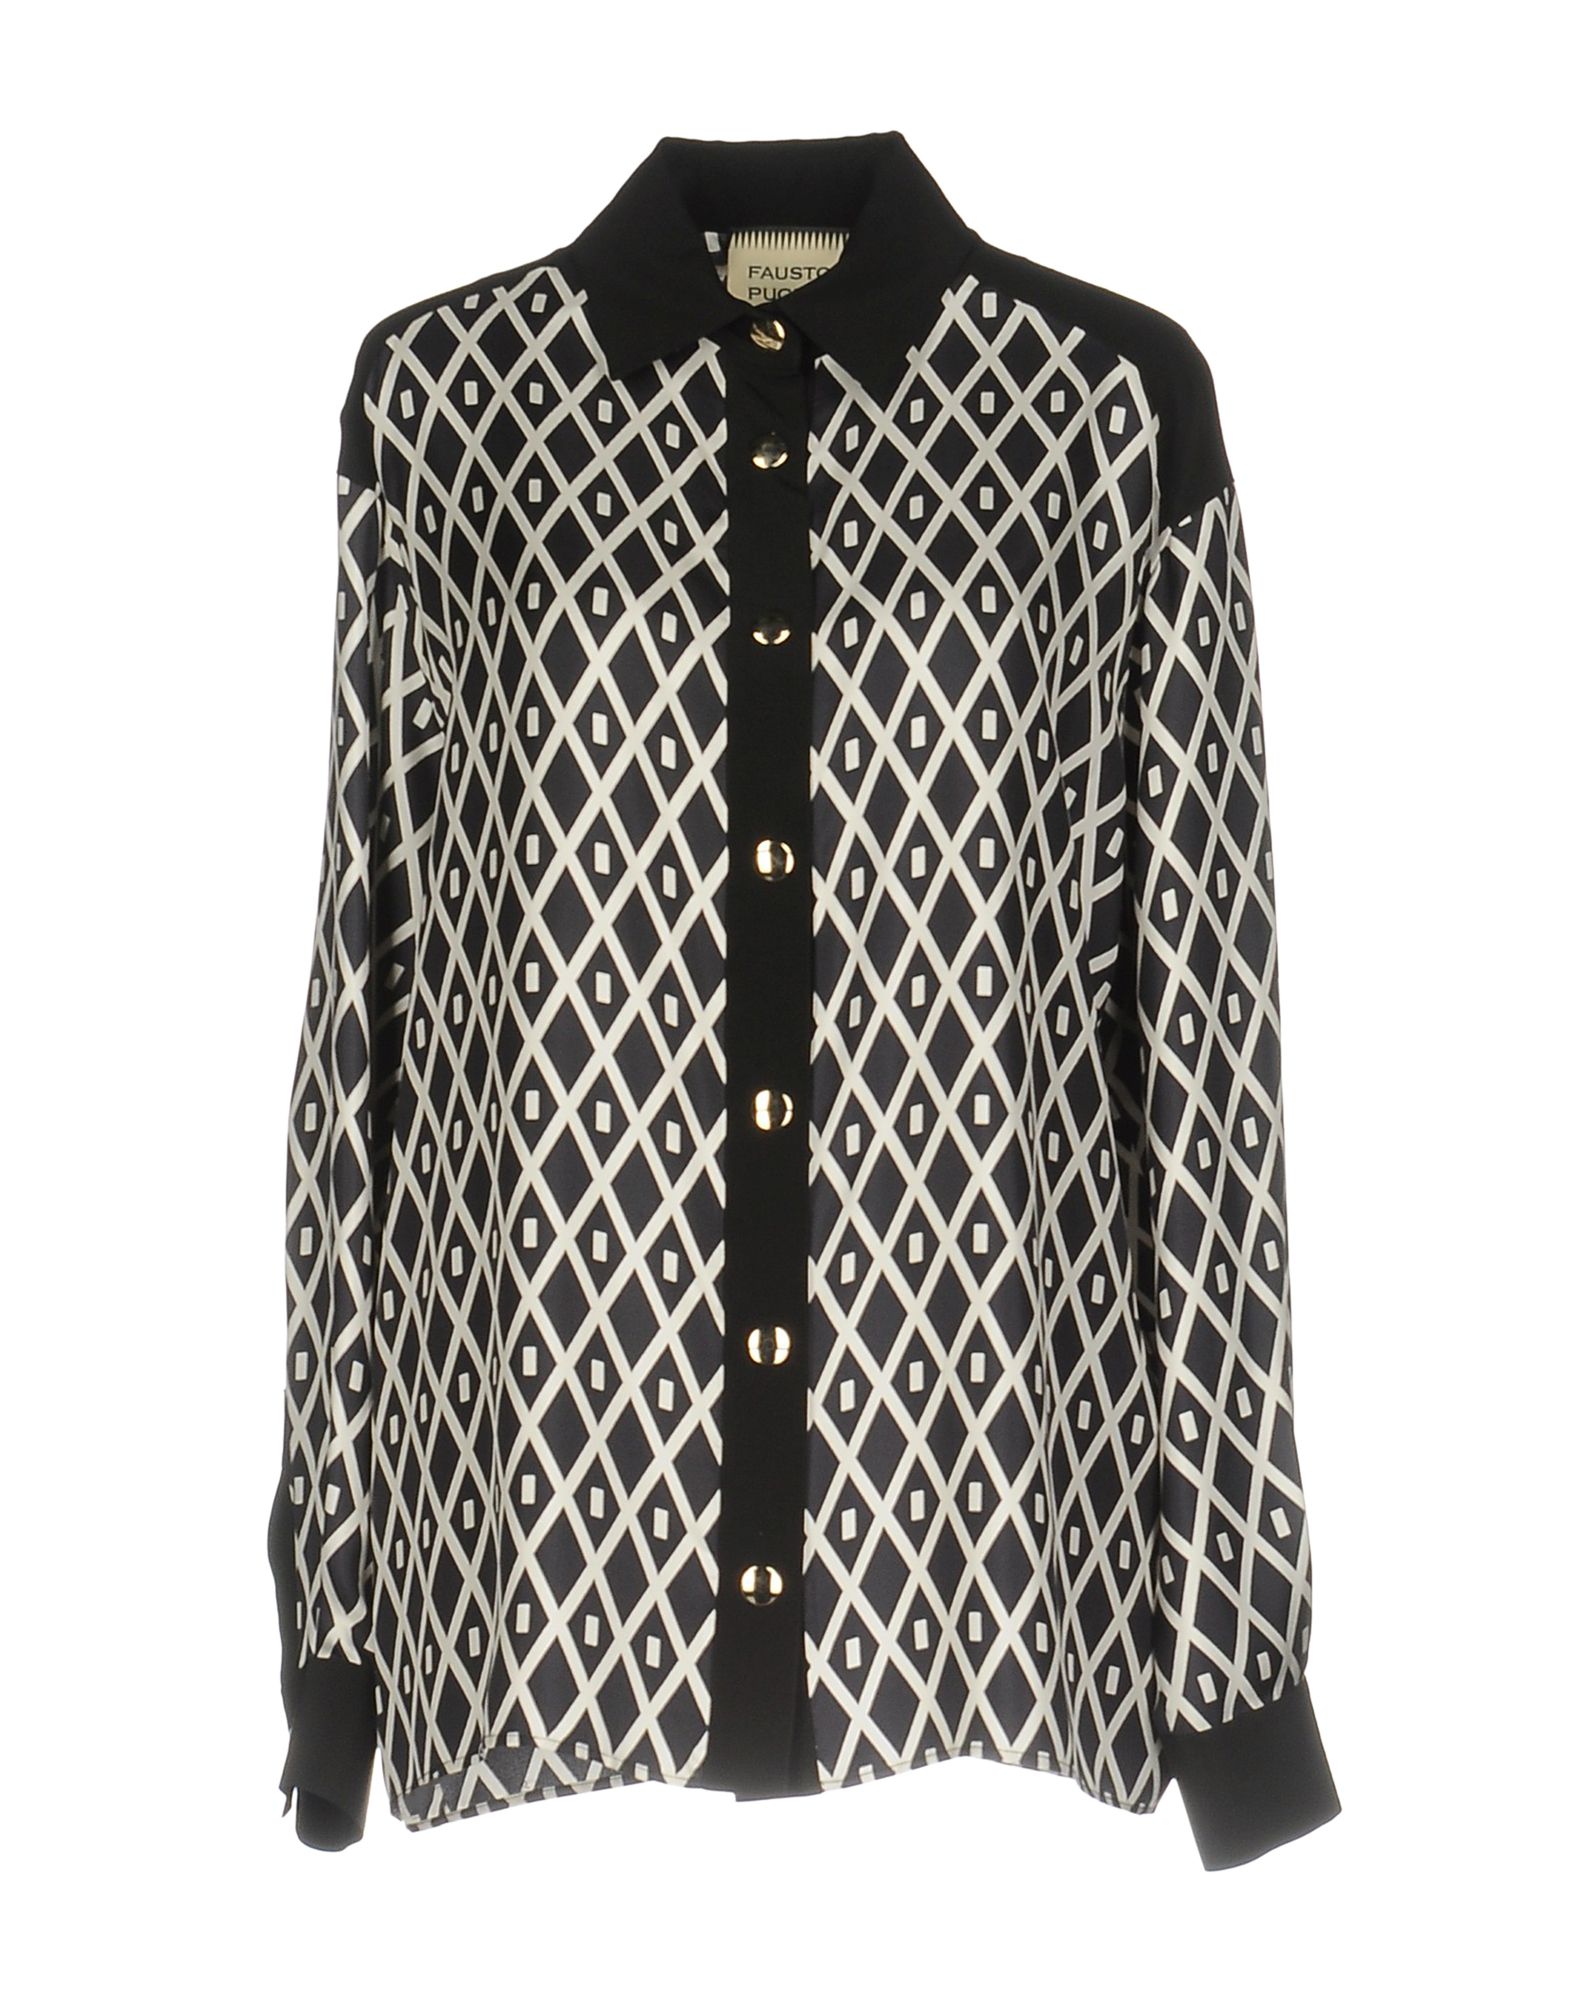 FAUSTO PUGLISI Patterned shirts & blouses,38619410UP 3